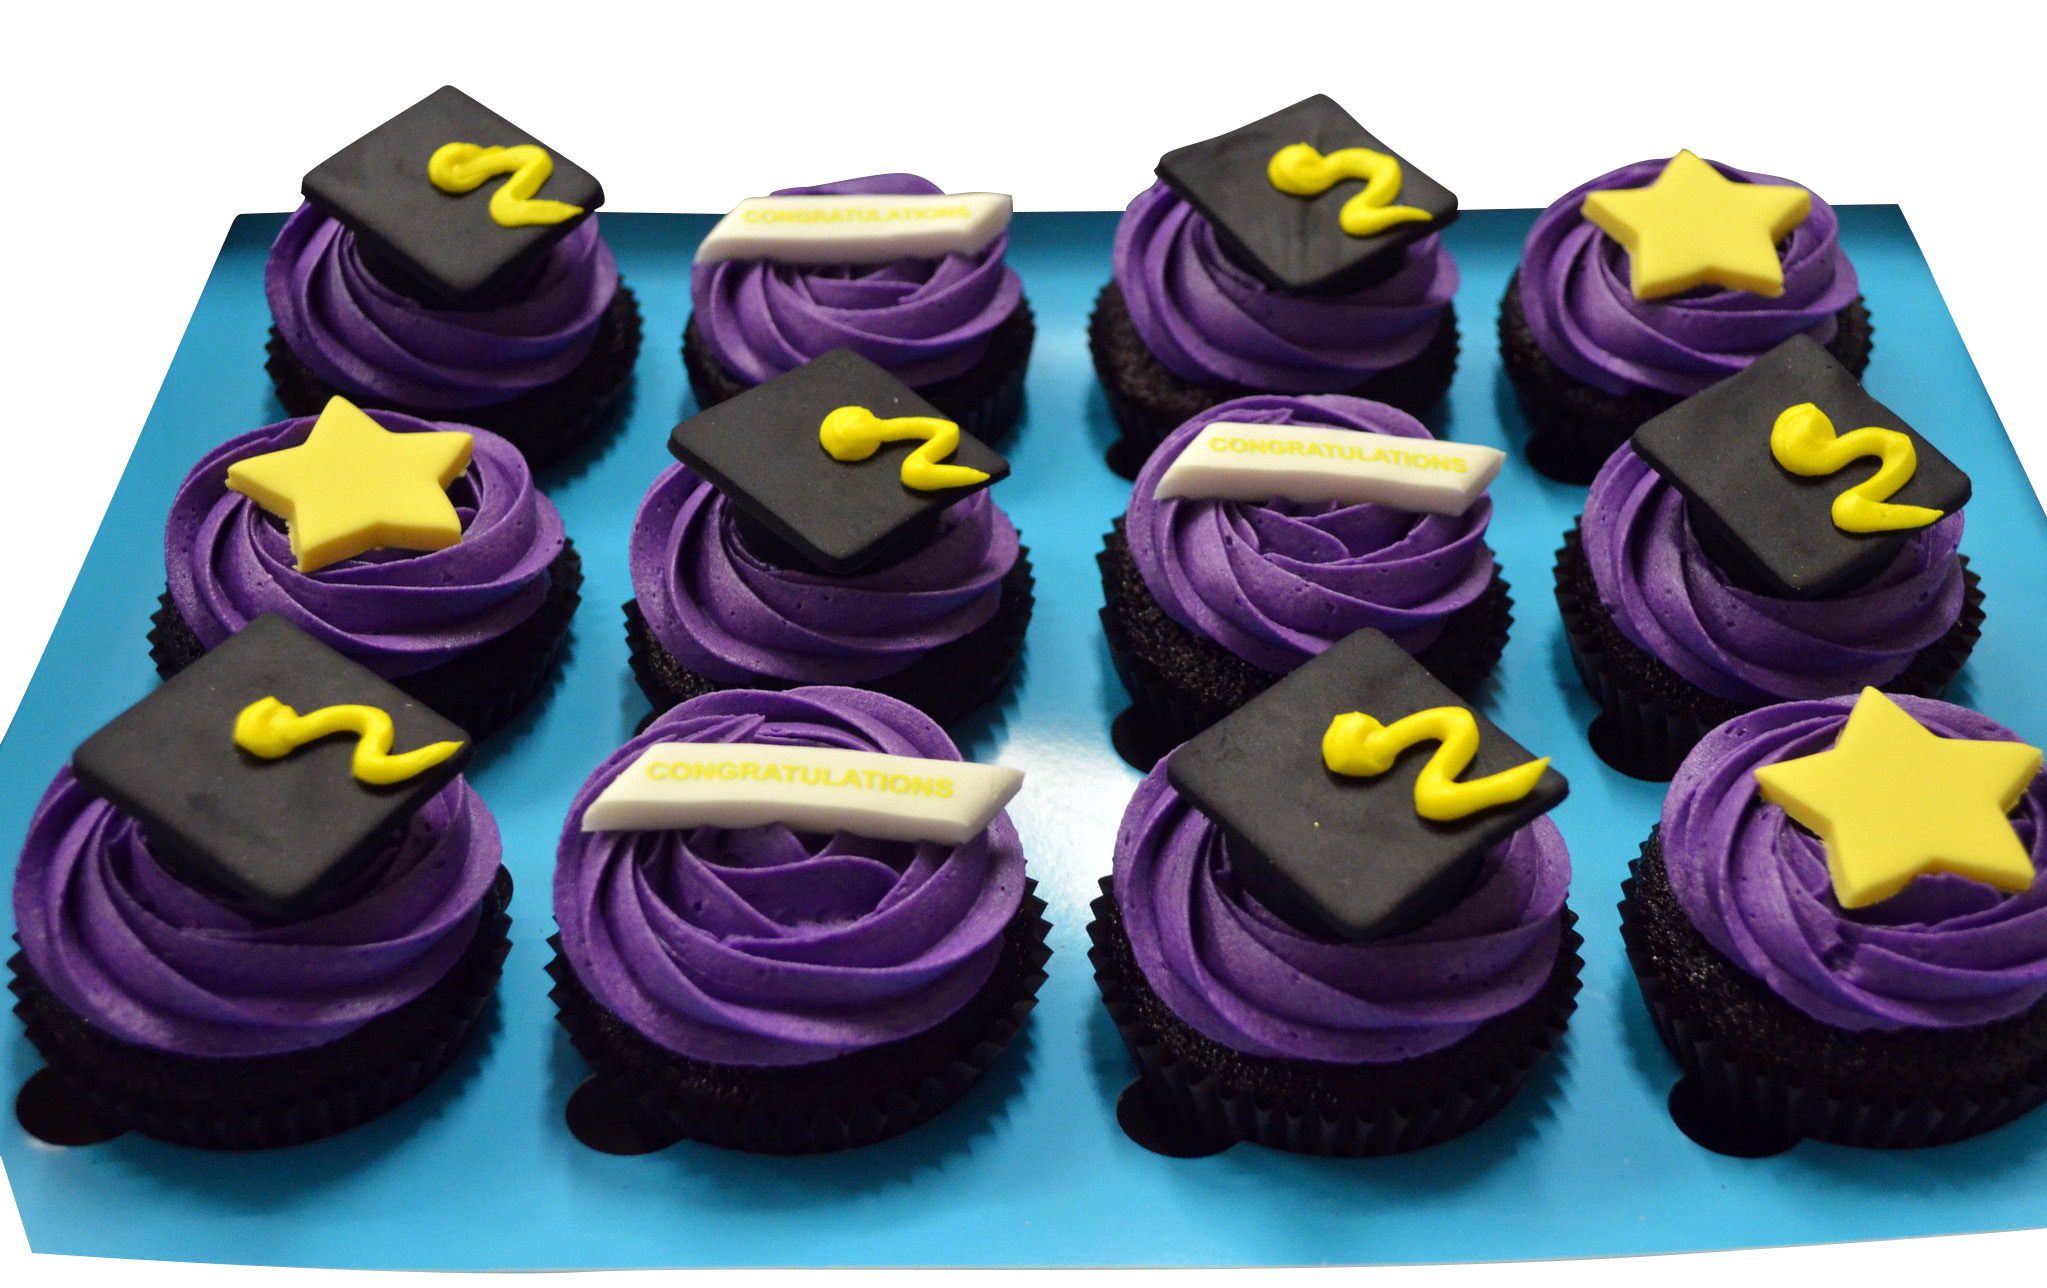 Purple Frosting Graduation Theme Cupcakes - Pack of 6